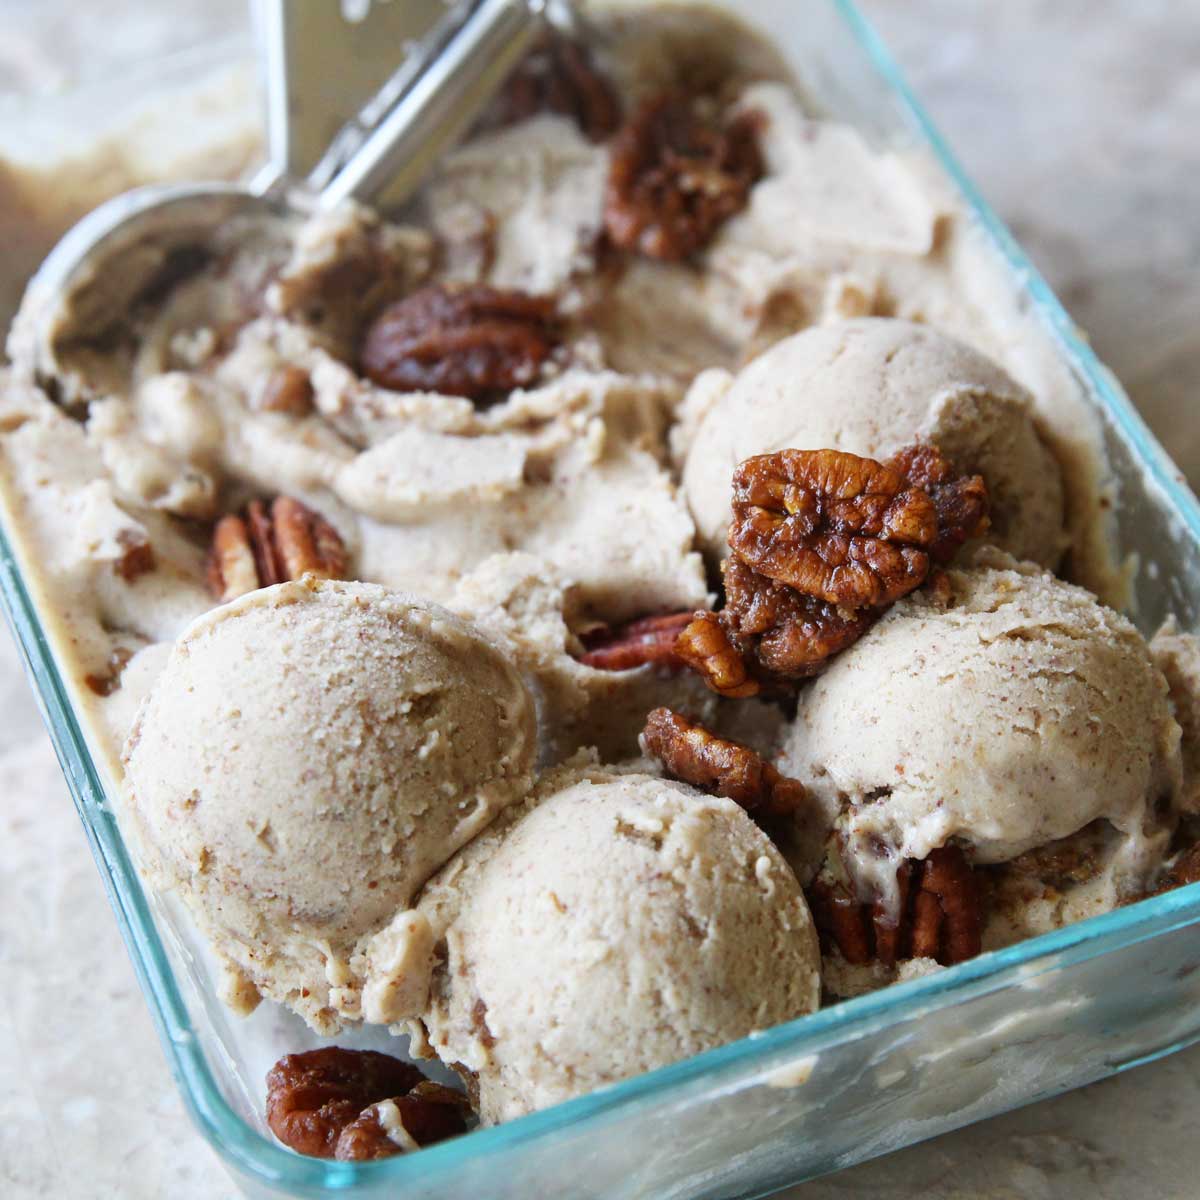 Healthy Pecan Butter Ice Cream (Made in the Food Processor) - Banana Chocolate Mochi